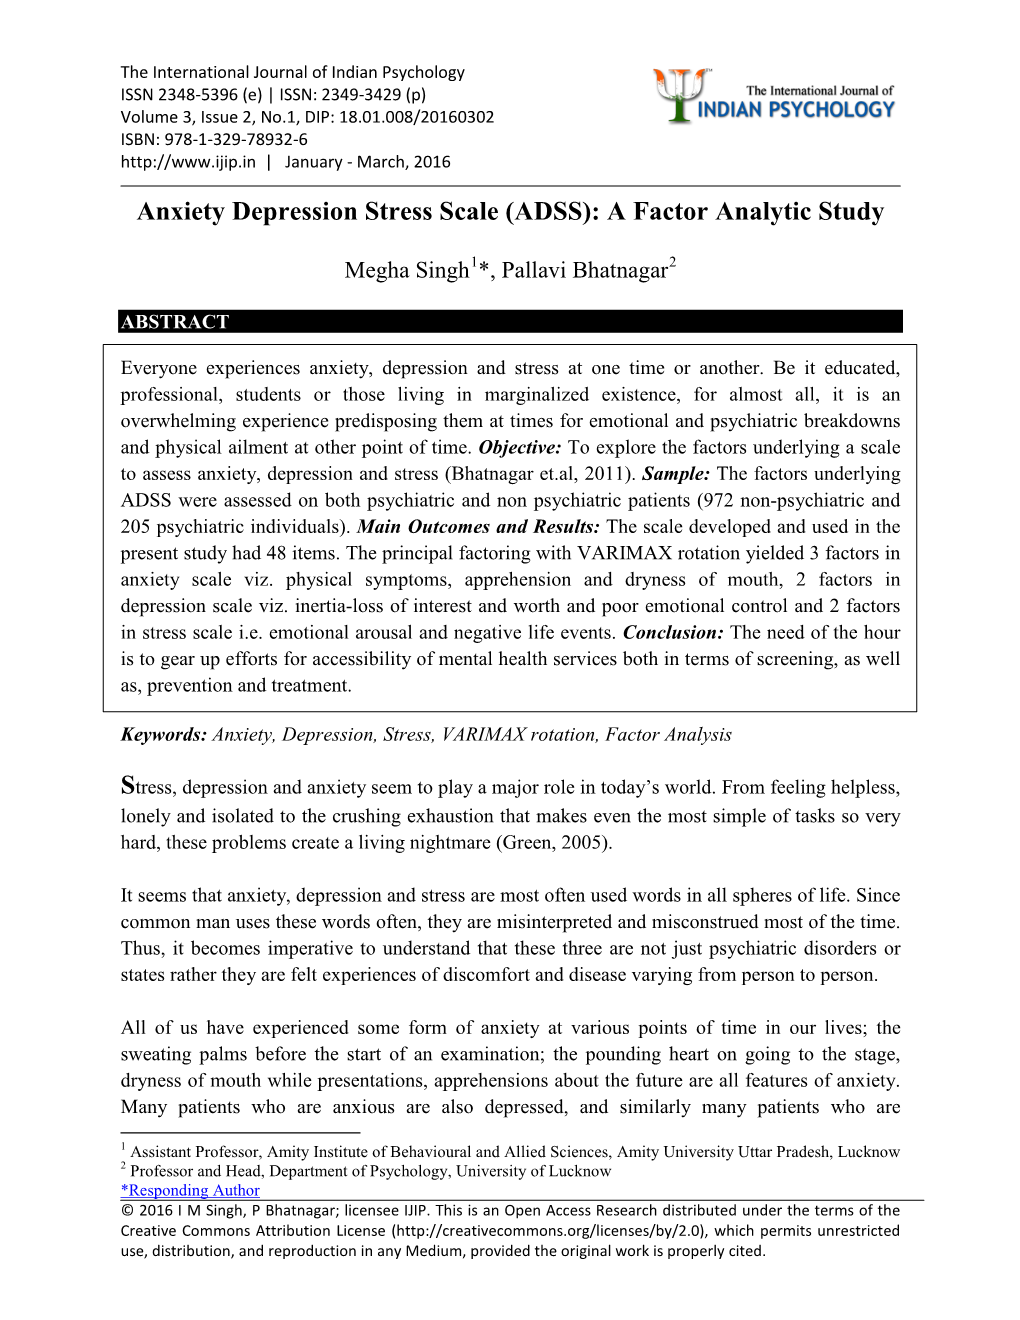 Anxiety Depression Stress Scale (ADSS): a Factor Analytic Study